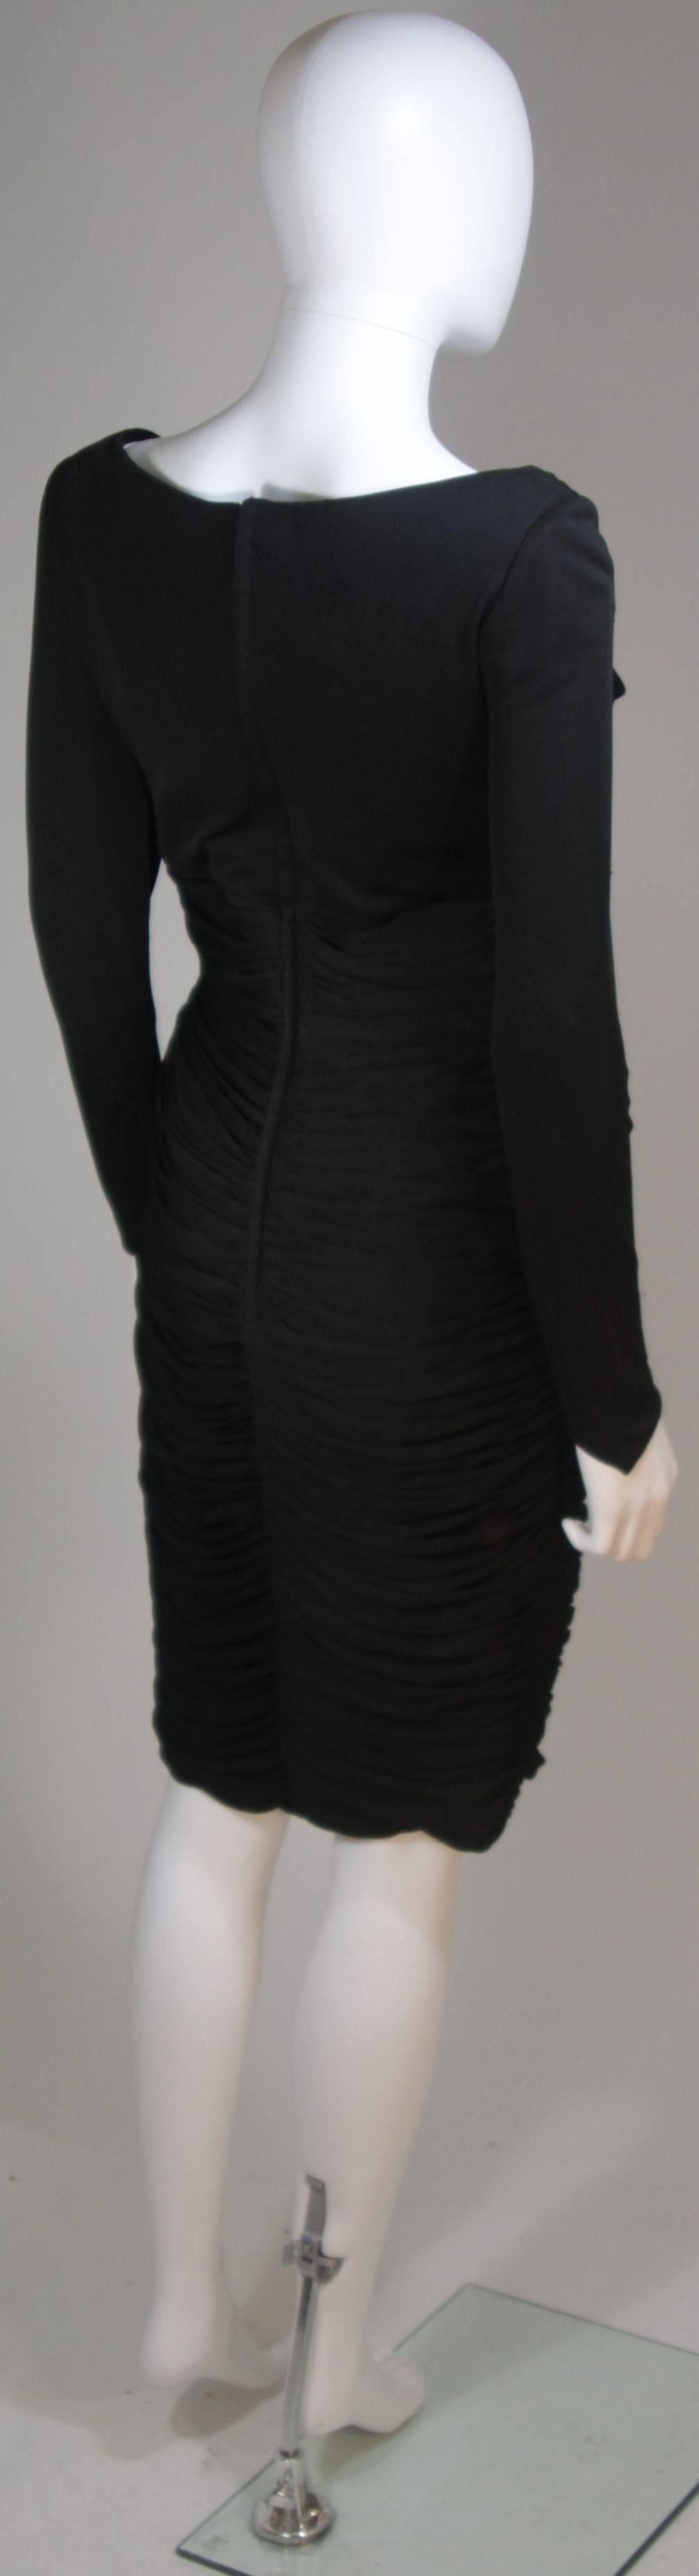 VICKY TIEL Black Long Sleeve Rouched Jersey Cocktail Dress Size 4-6 For Sale 3